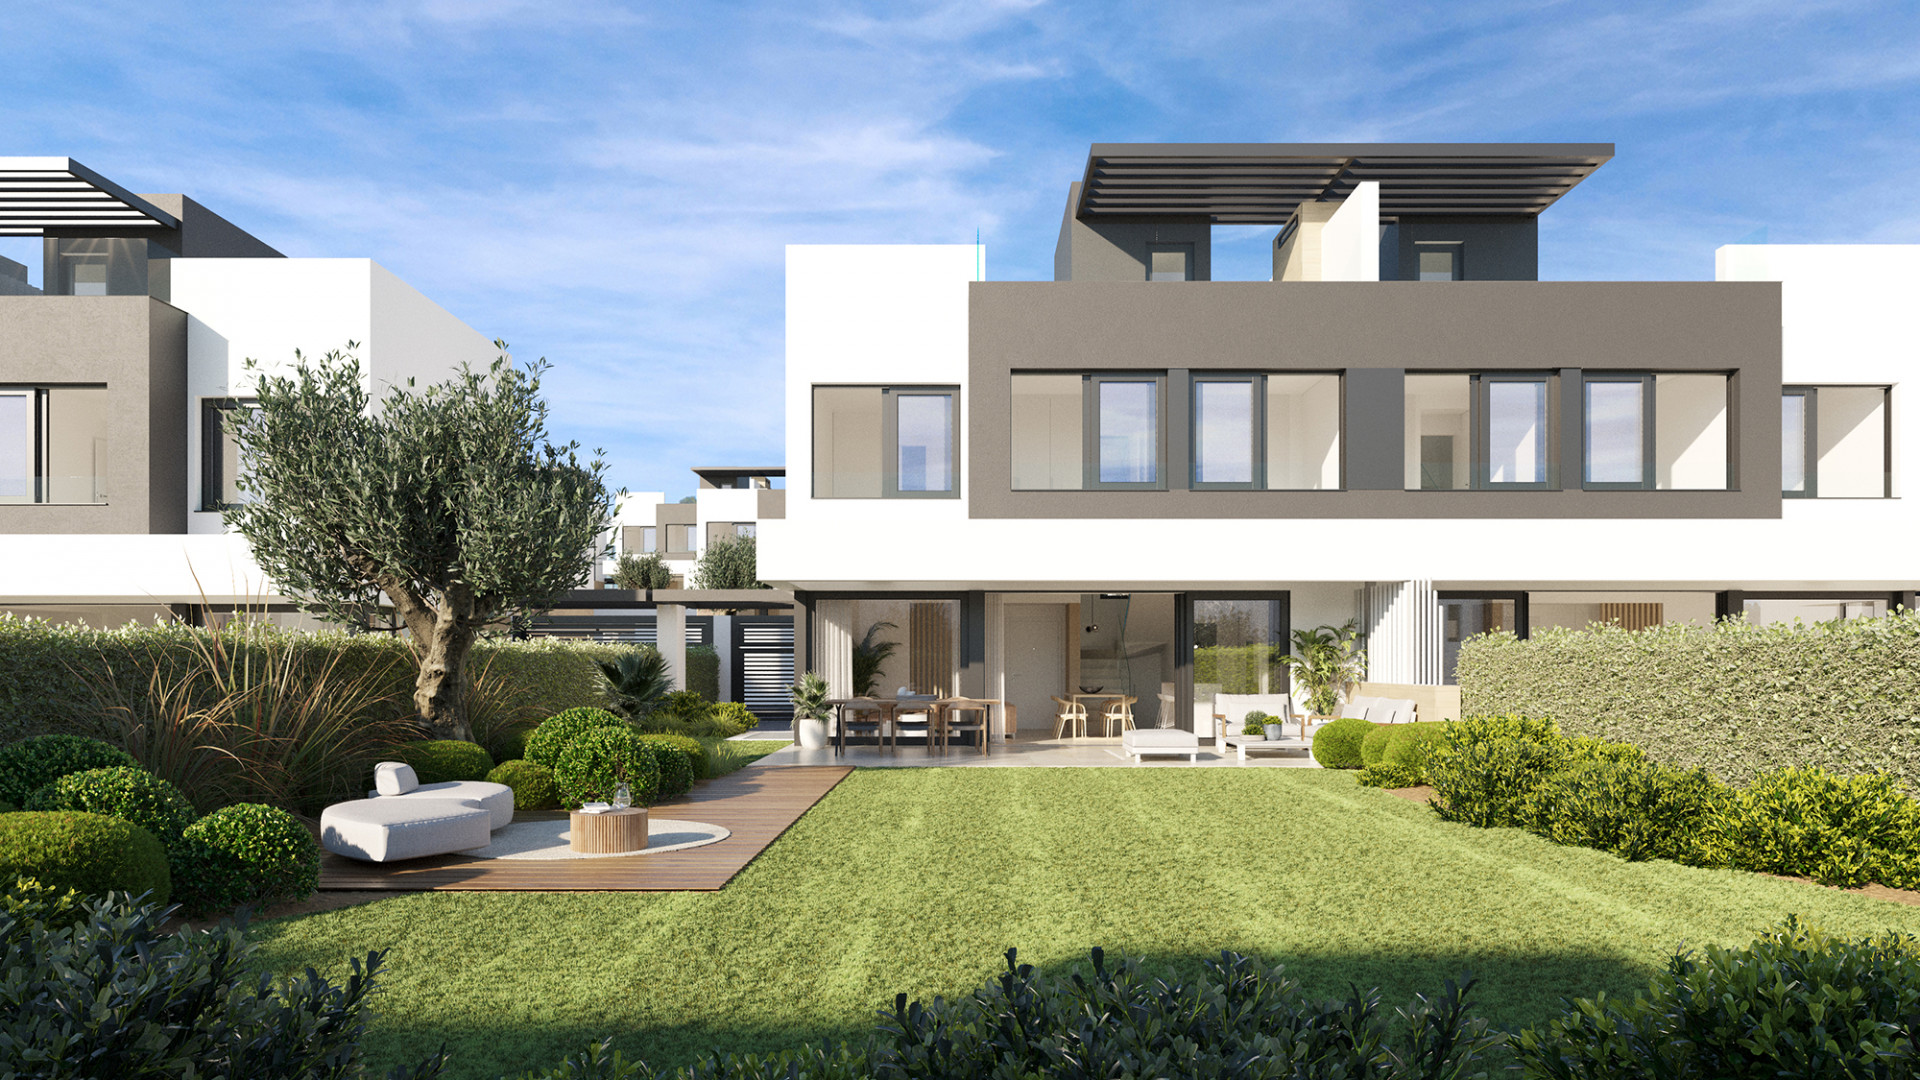 50 semi-detached villas with 2 and 3 bedrooms and 9 different types to suit e...